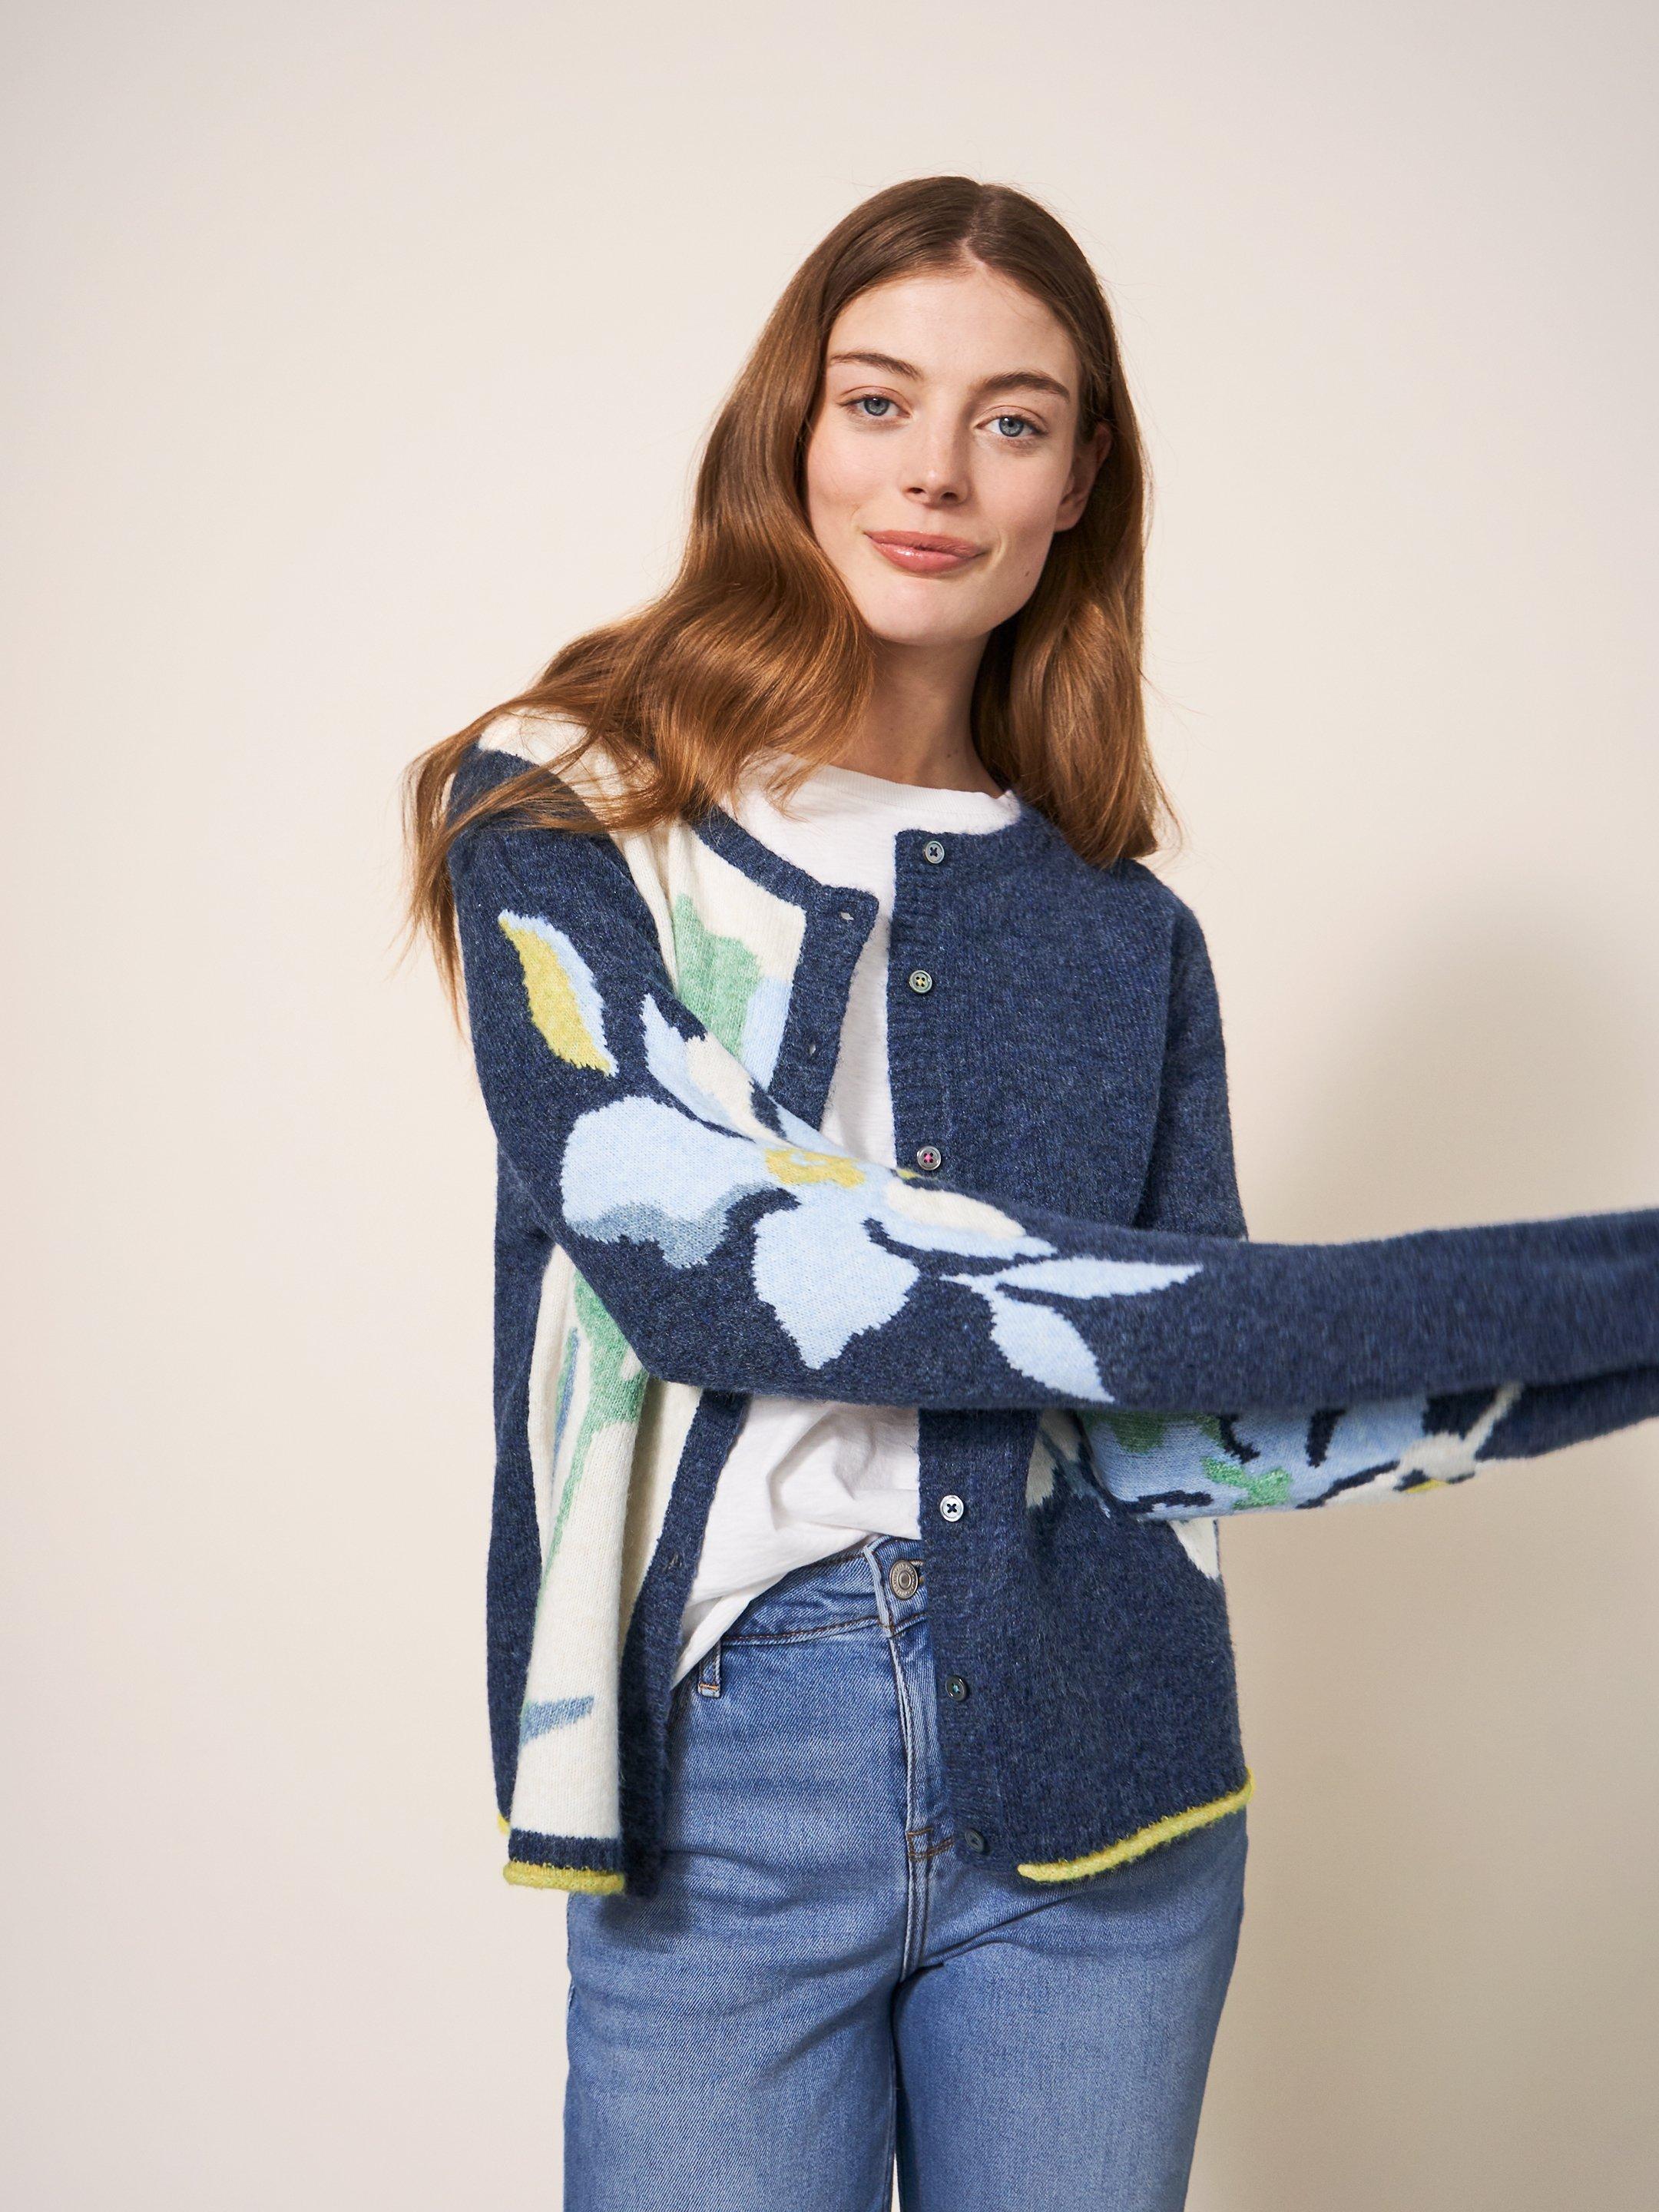 FLORAL CARDI in NAVY MULTI - LIFESTYLE